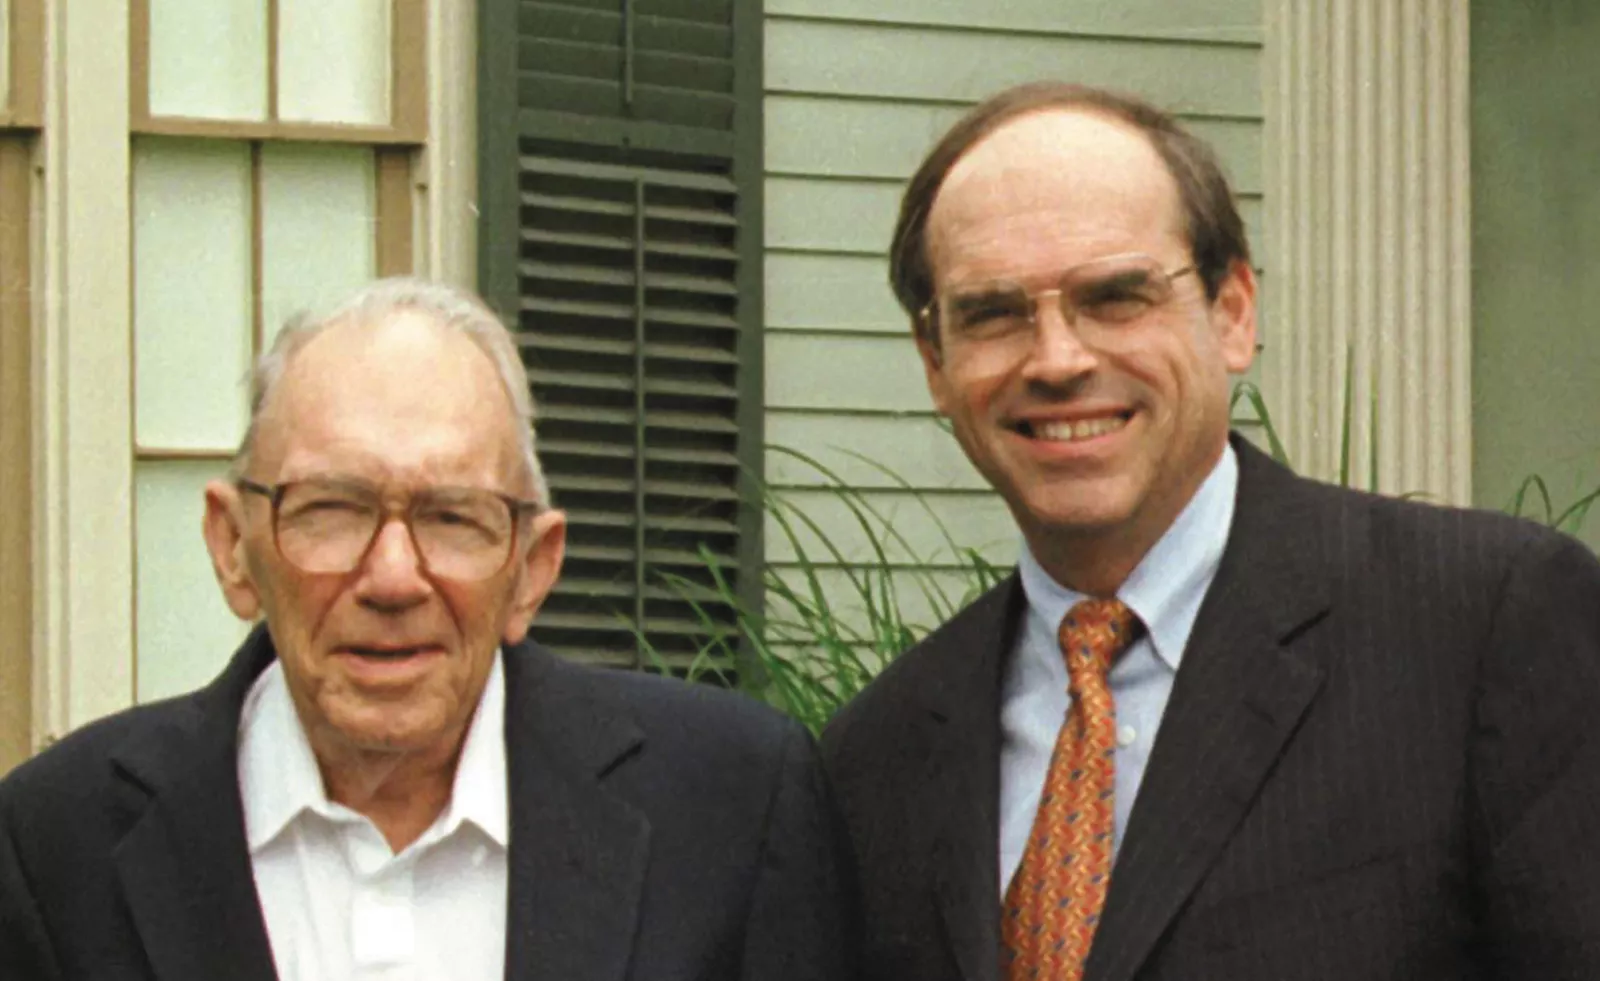  Photograph of Zeke McIntyre and John Bachmann, who opened the firm’s first branch office in Mexico, Missouri in 1957.
